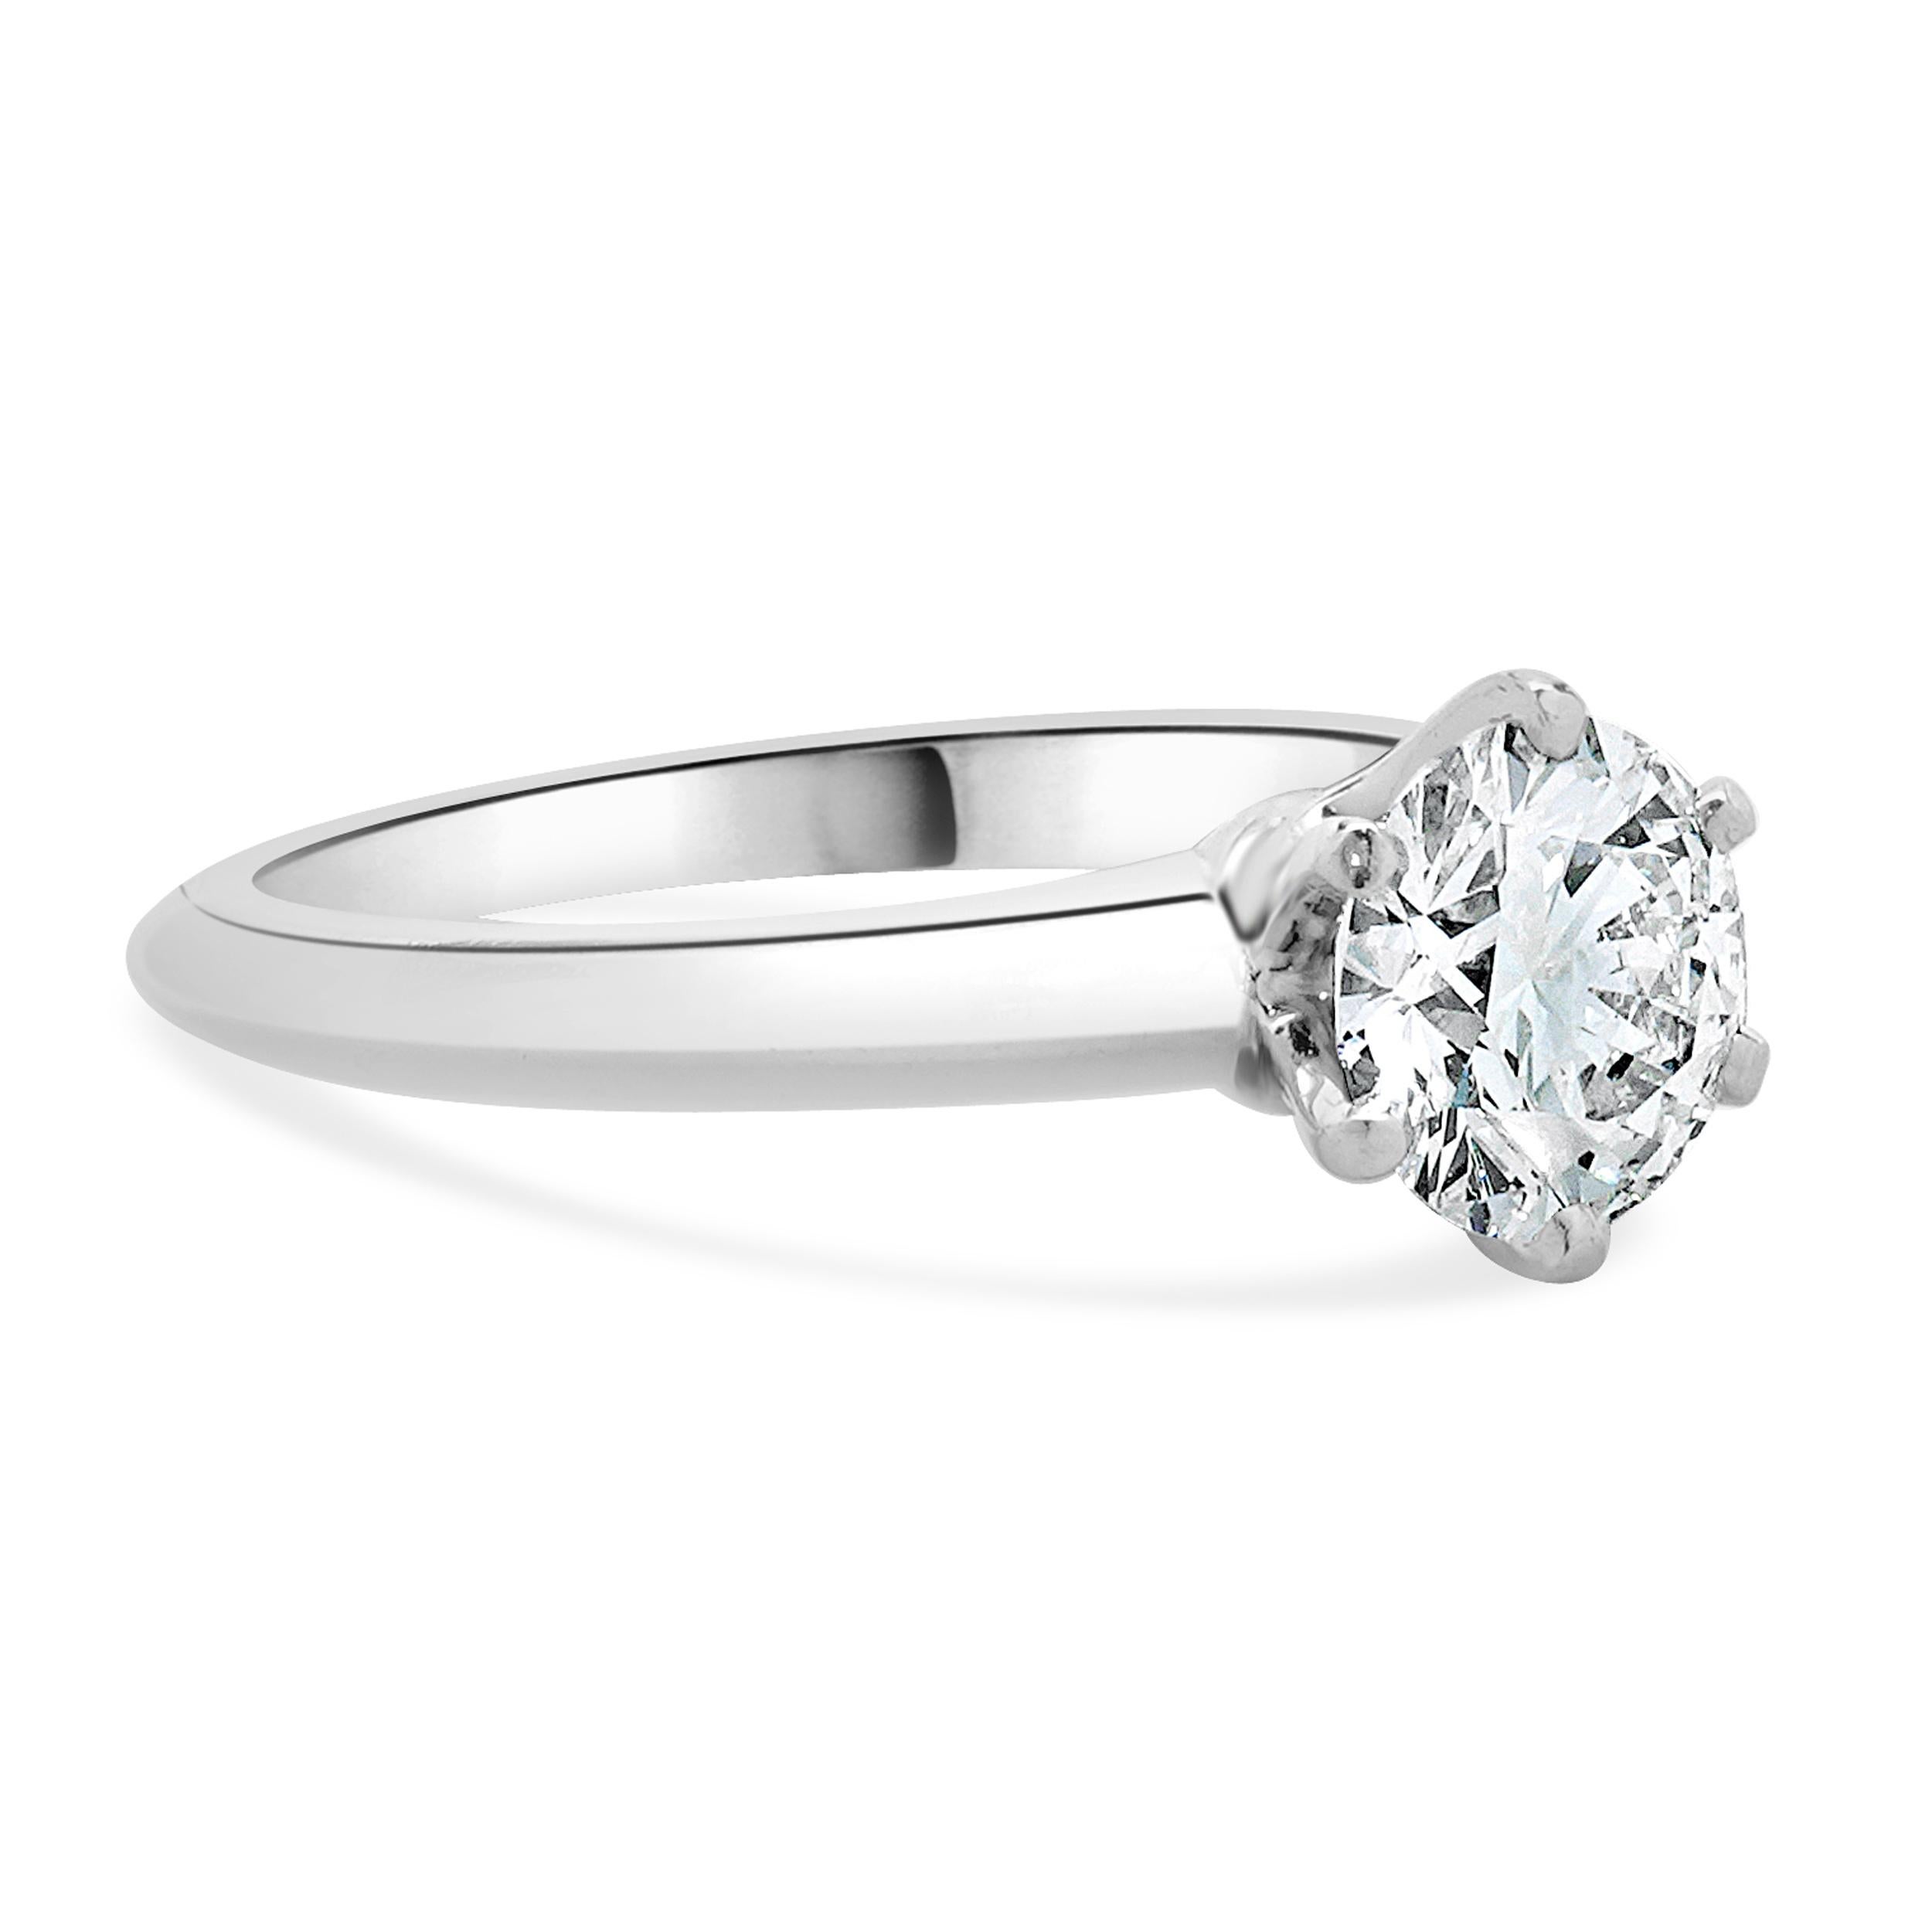 Designer: Tiffany & Co. 
Material: platinum
Diamond: 1 round brilliant = 1.14ct
Color: D
Clarity: VS1
GIA: 11502839
T & Co. Cert # 17002856/C10030192
Dimensions: ring top measures 2.8mm wide
Weight: 5.10 grams
Size: 5.75 complimentary sizing